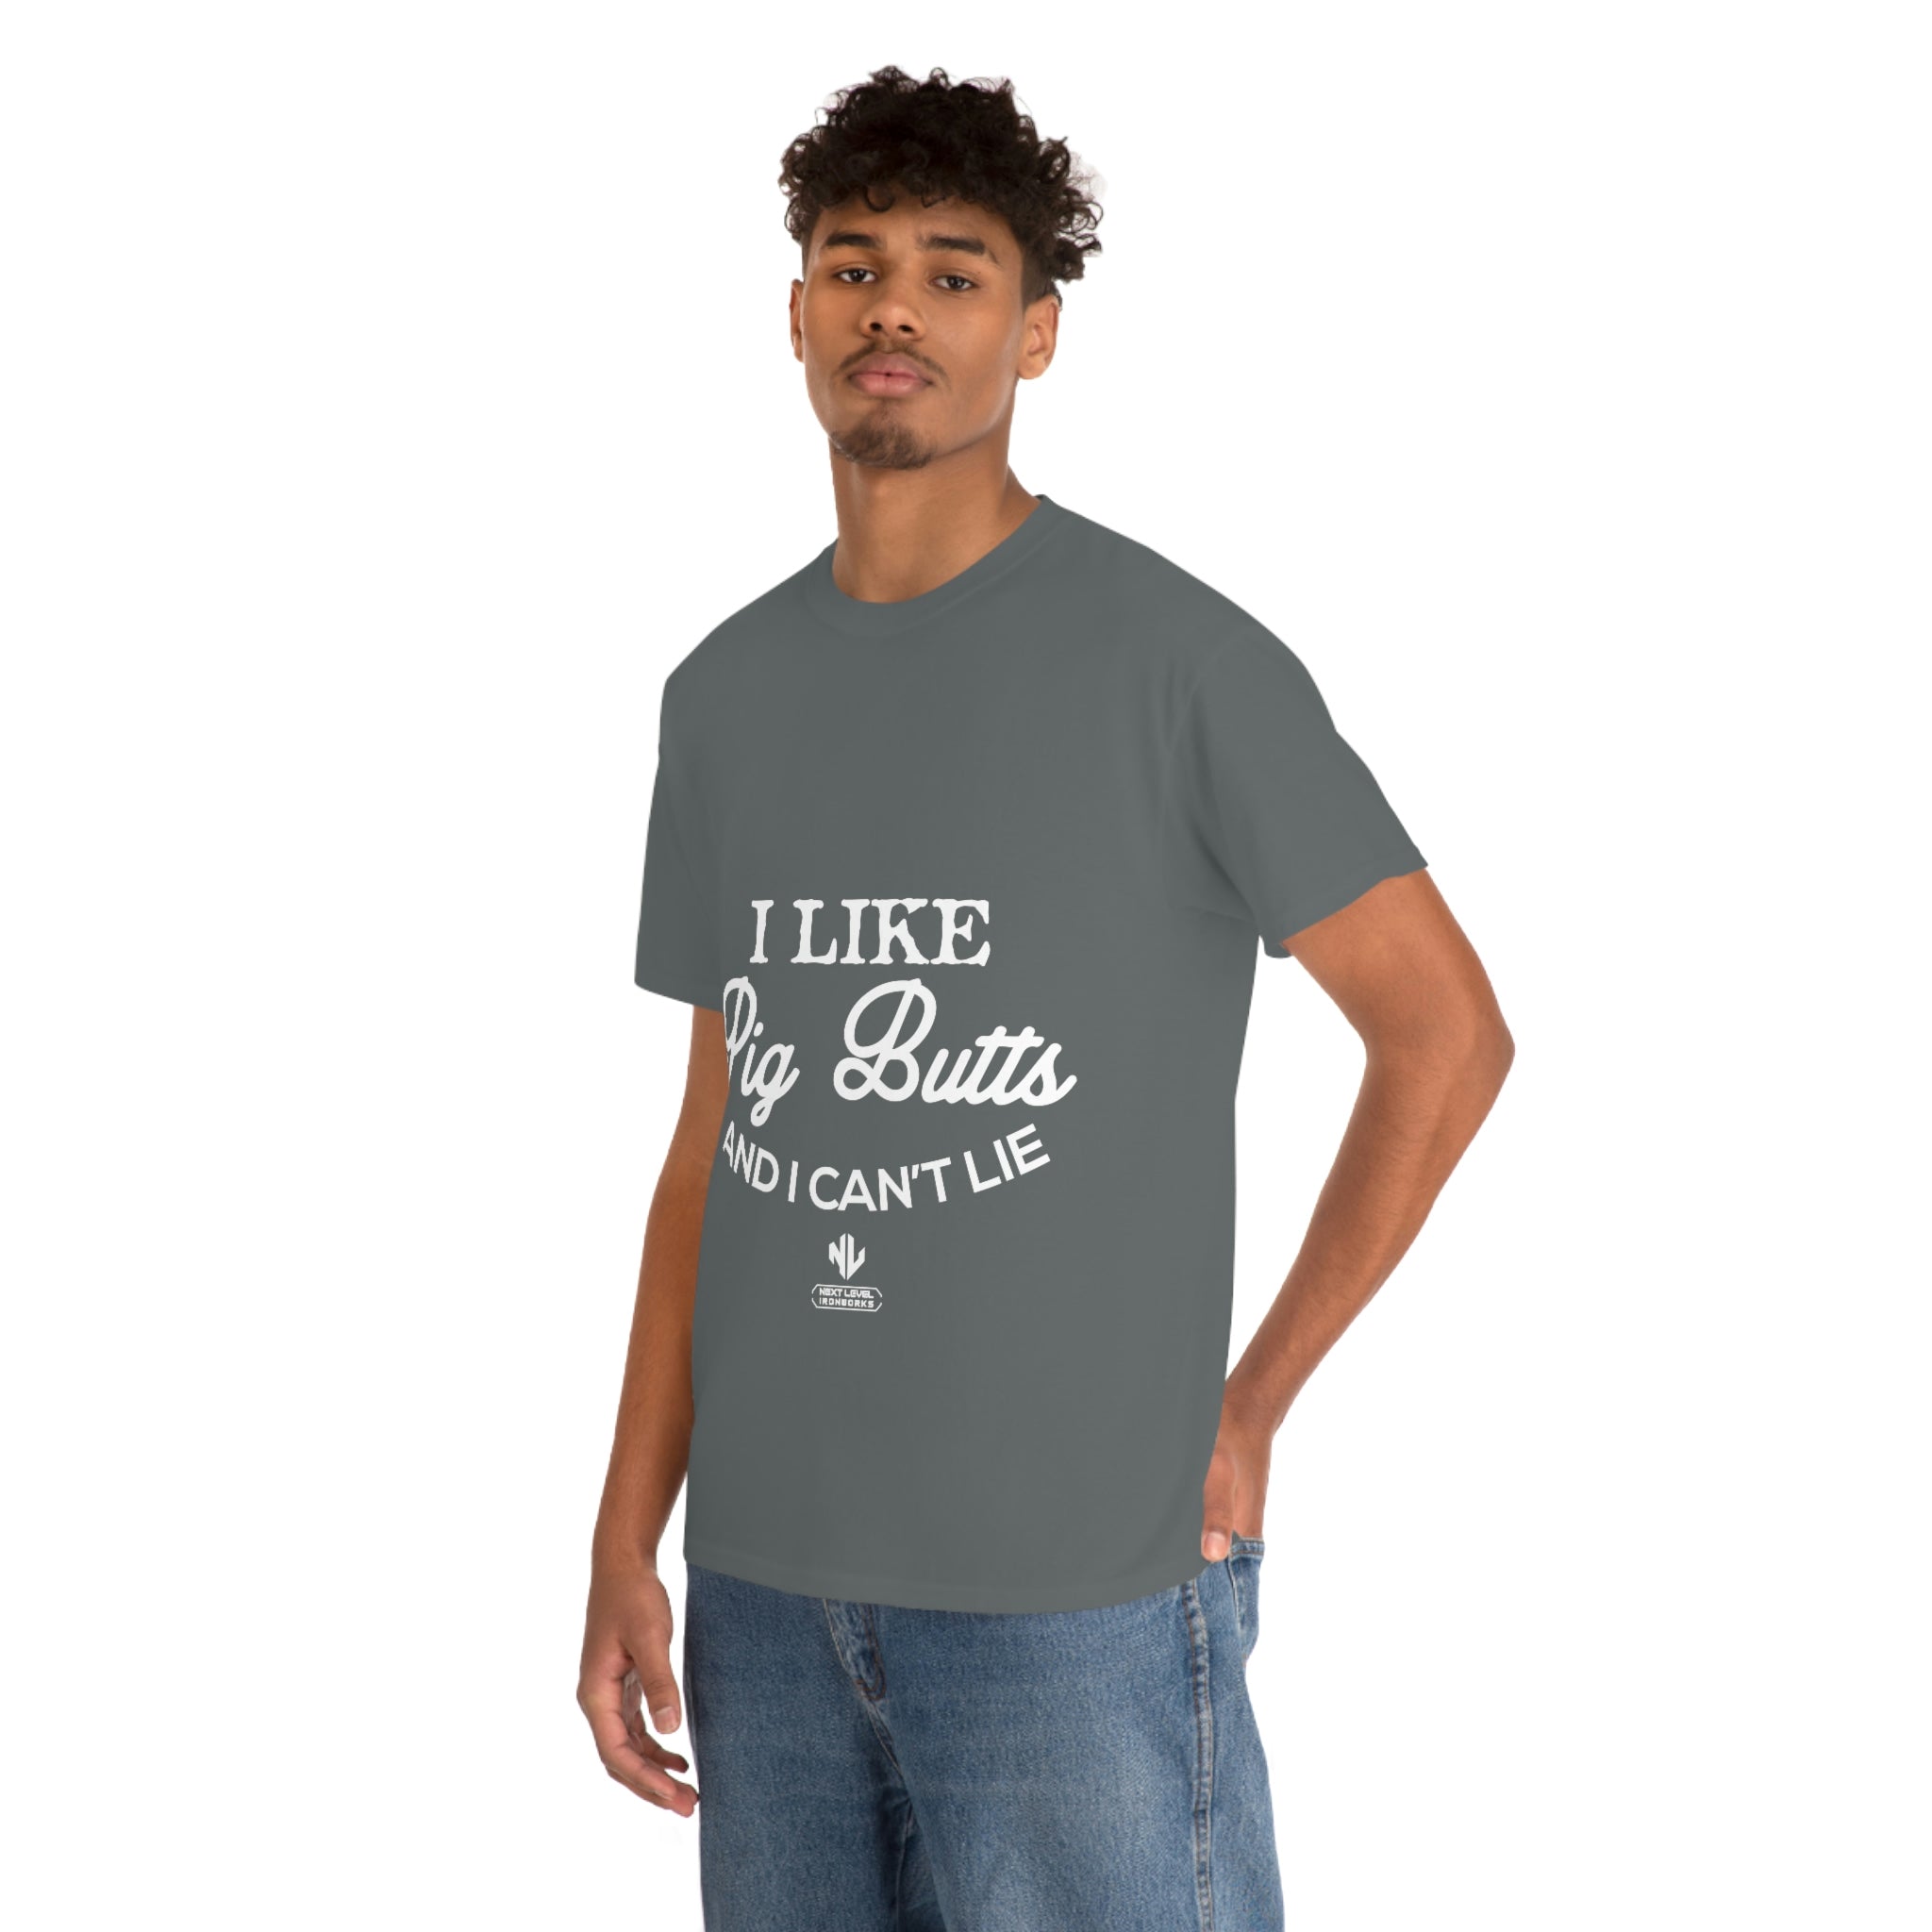 I Like Pig Butts And I Can't Lie shirt